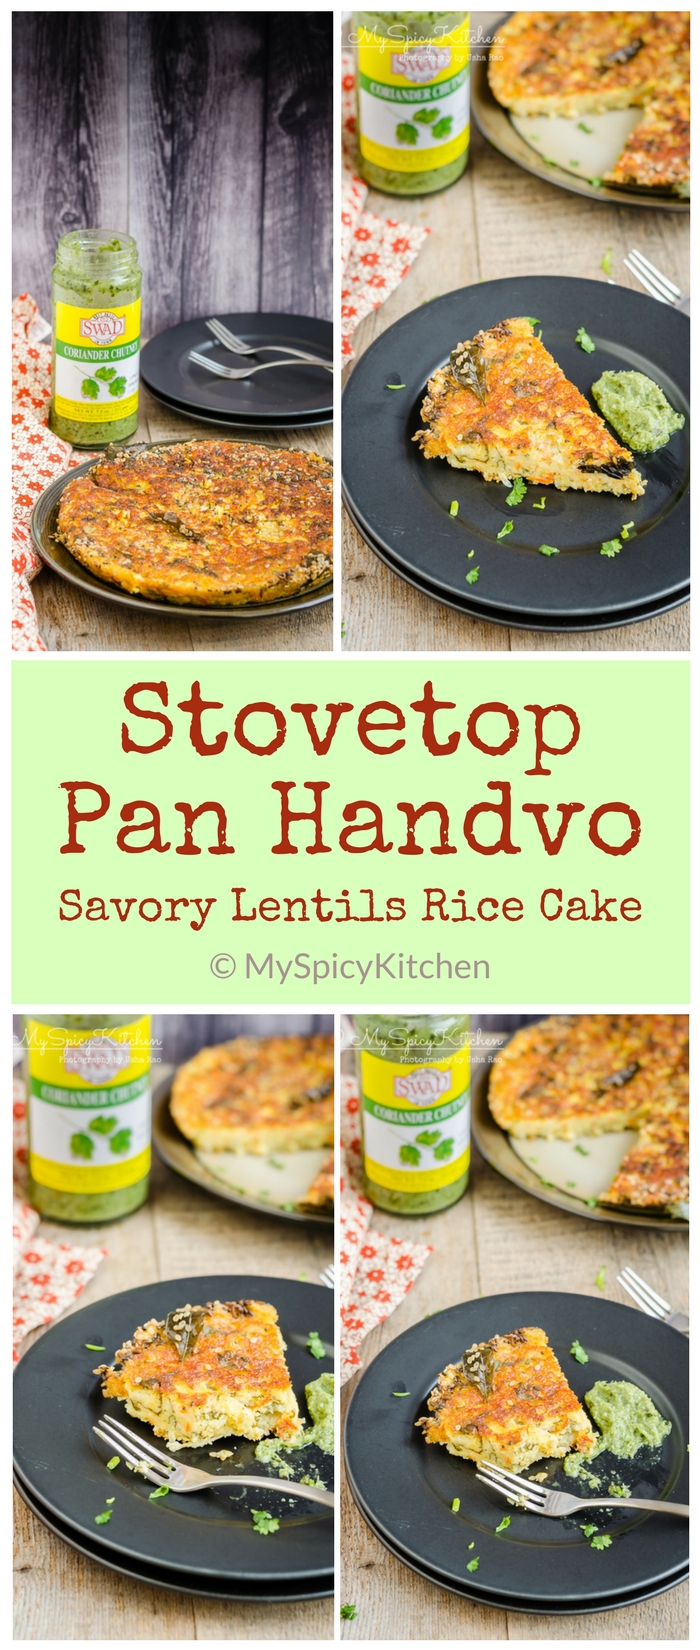 Stovetop Pan Handvo is a spicy mixed lentils rice cake from Indian state of Gujarat.  It can be prepared on stovetop and oven.  Can eat it for breakfast, as a snack and as a light meal. 